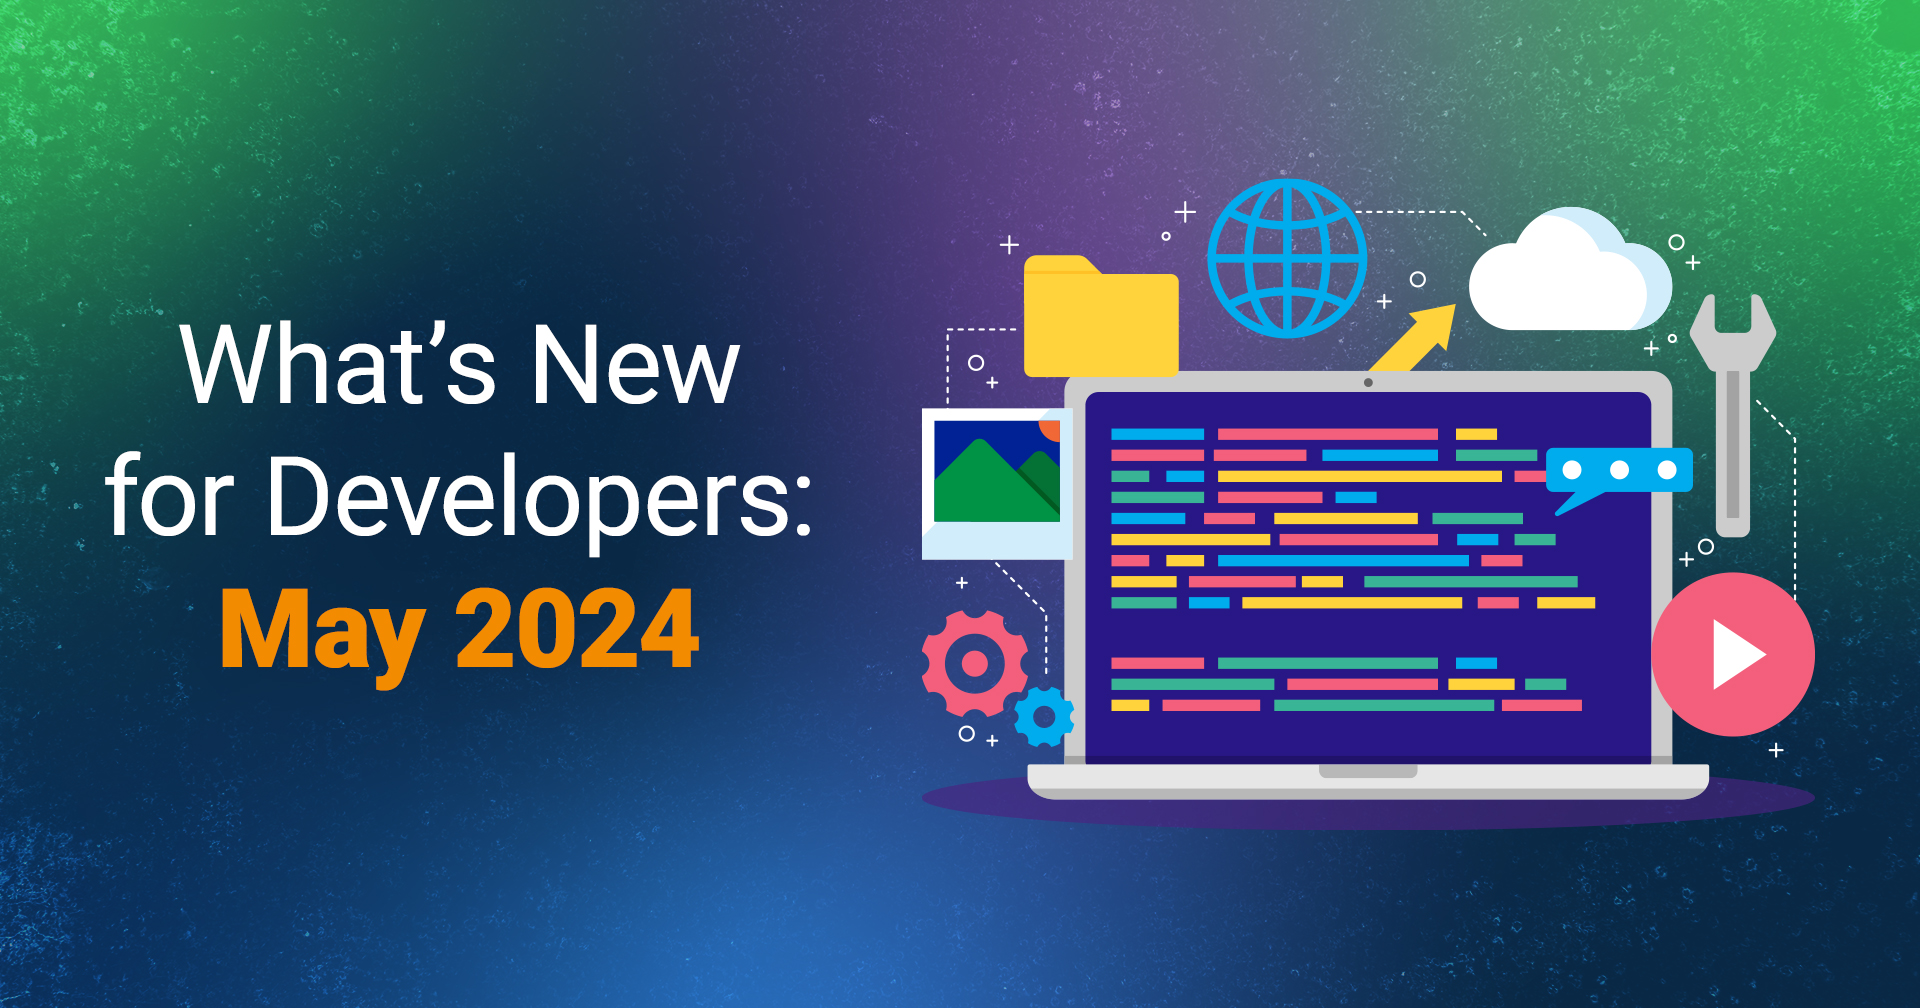 What's New for Developers: May 2024, with text.